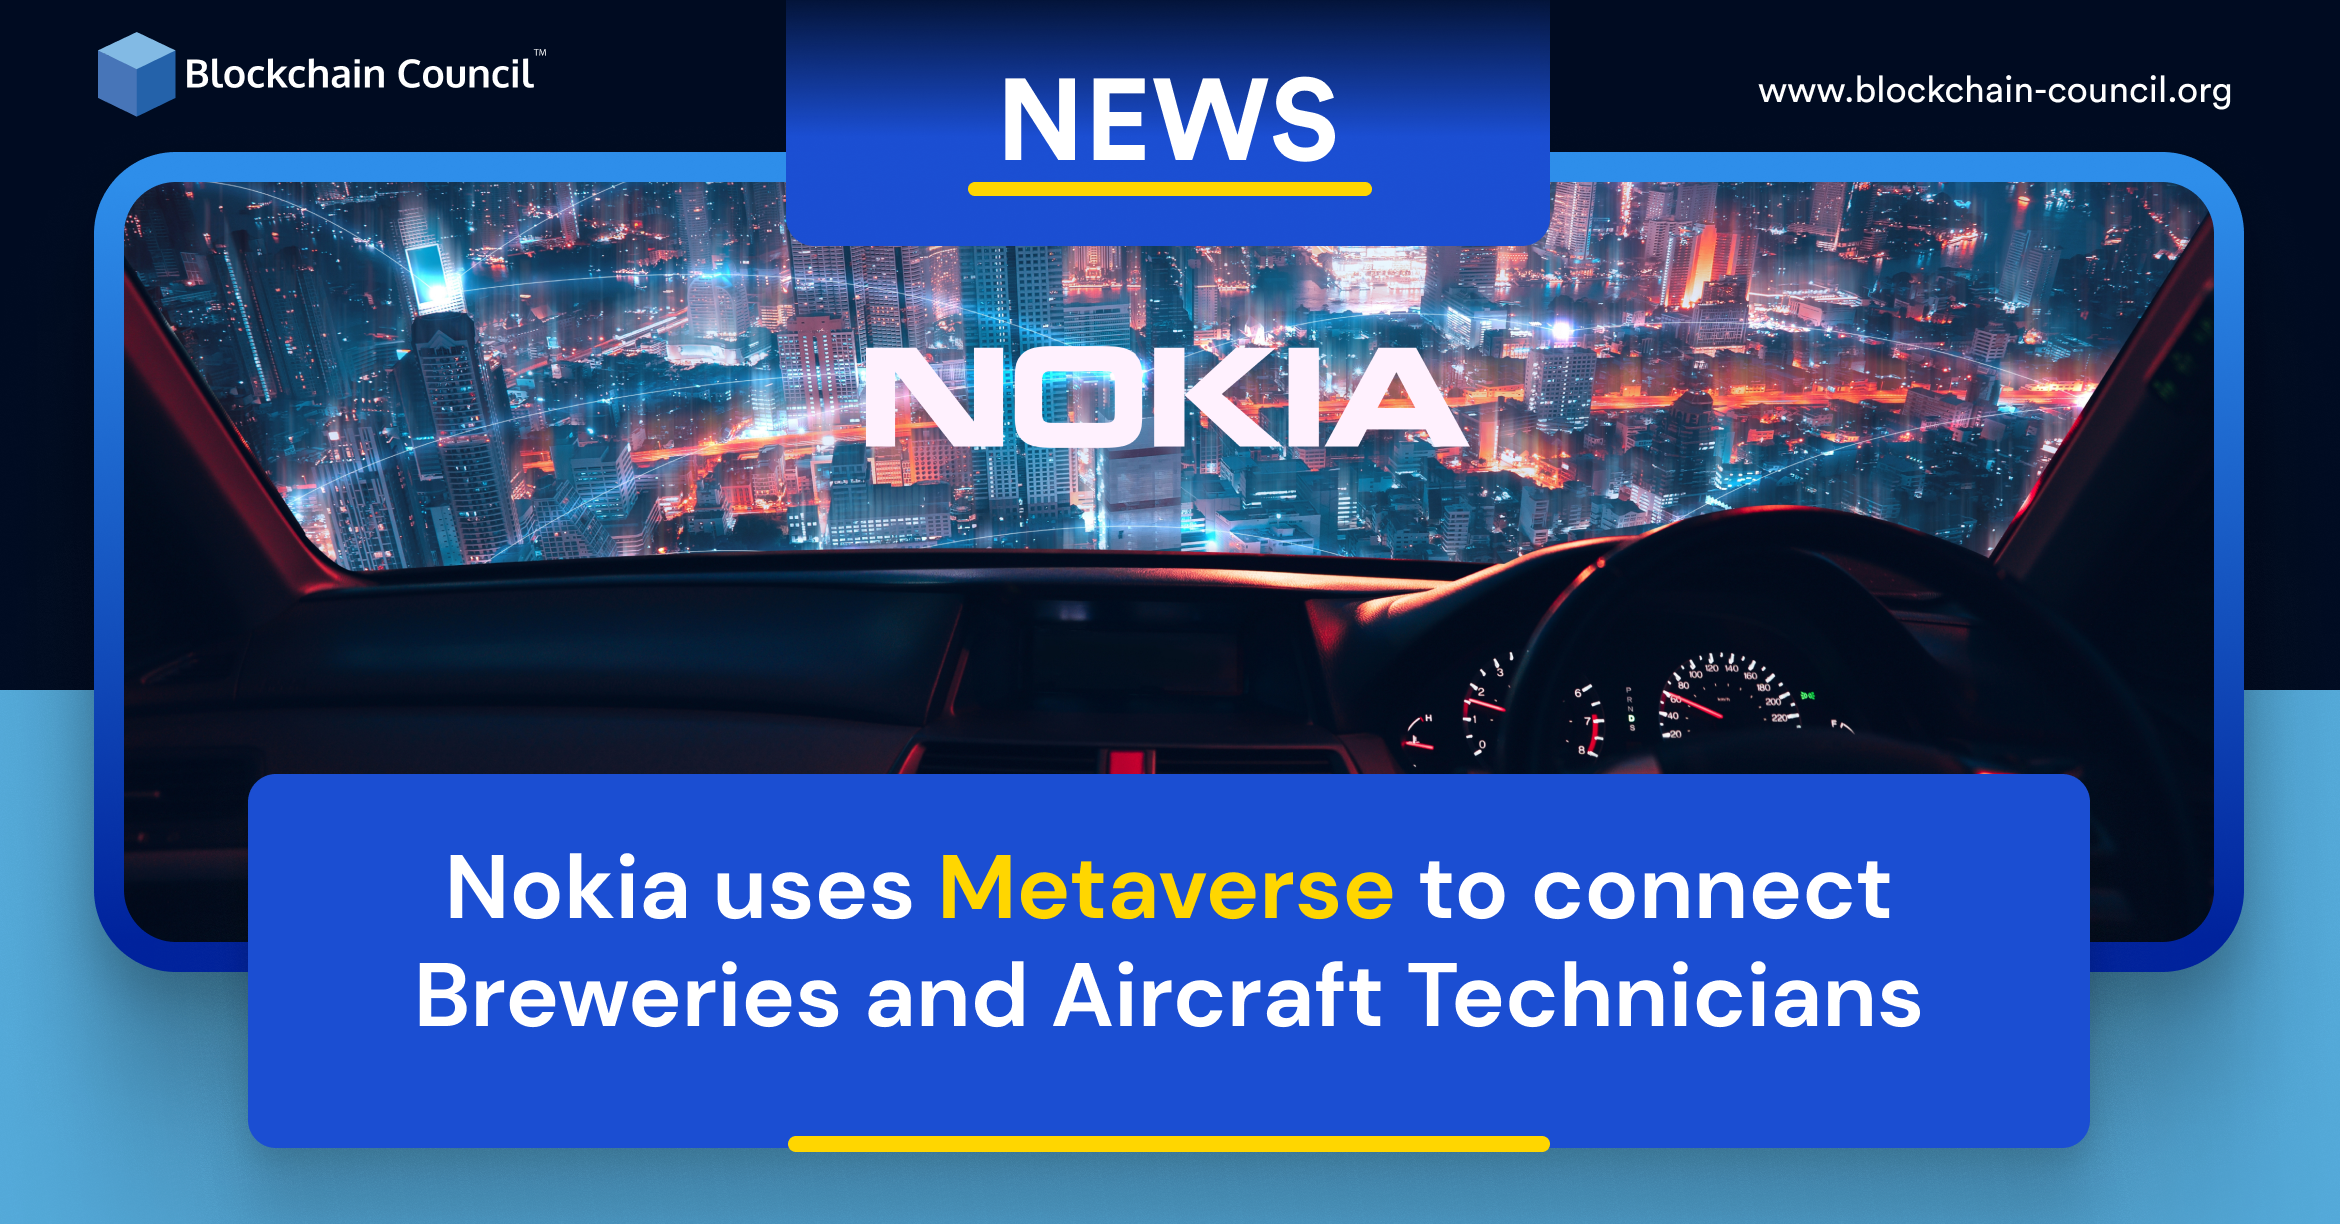 Nokia uses Metaverse to connect Breweries and Aircraft Technicians